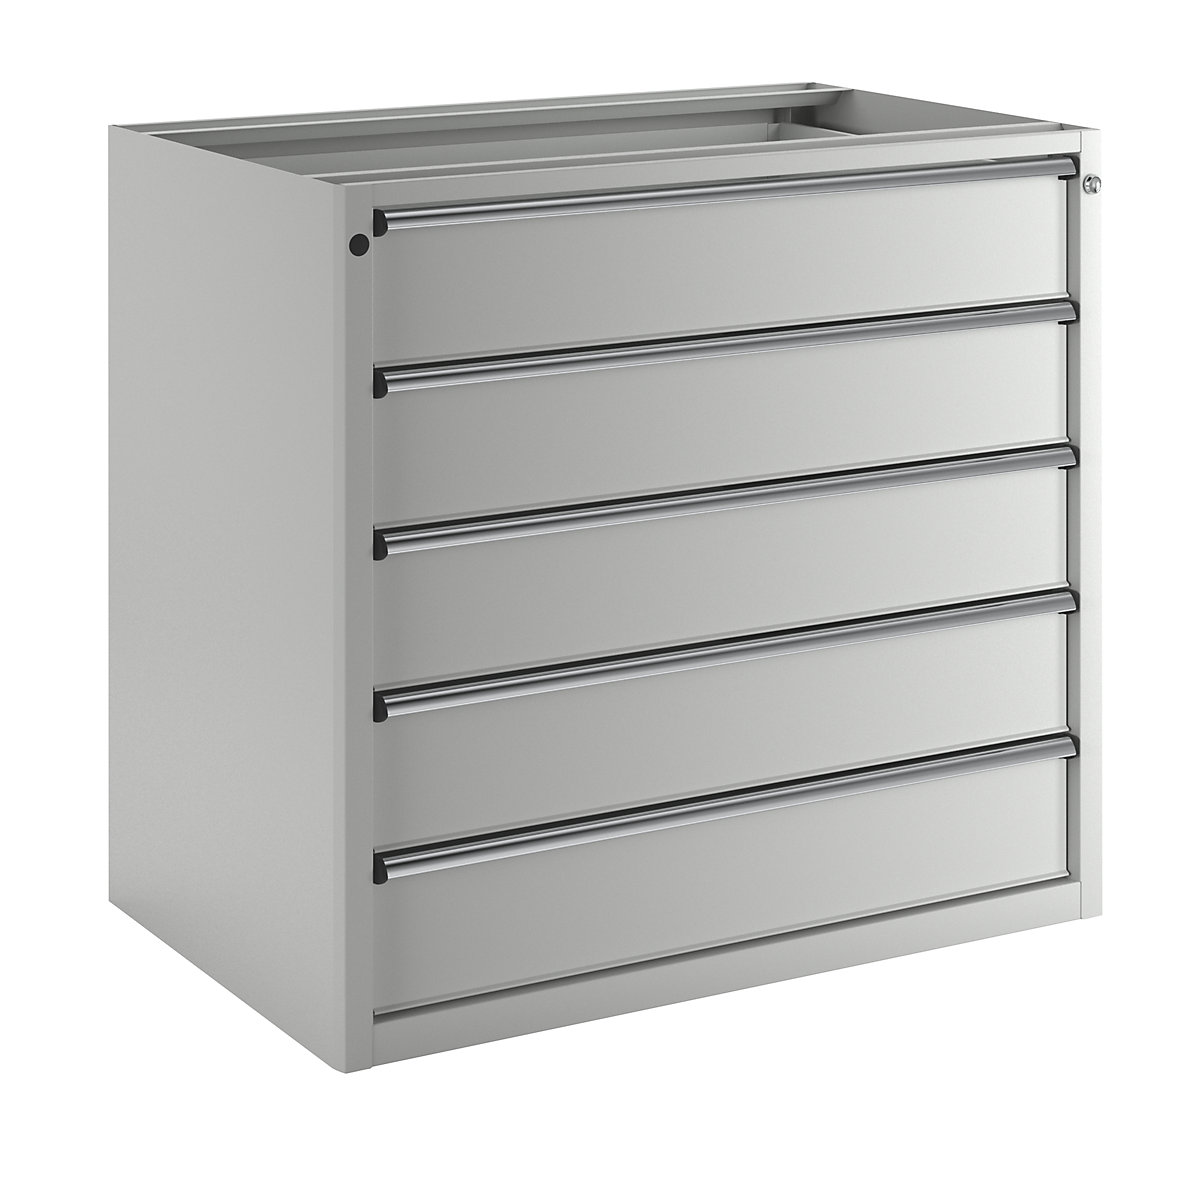 Drawer cupboard without worktop – ANKE